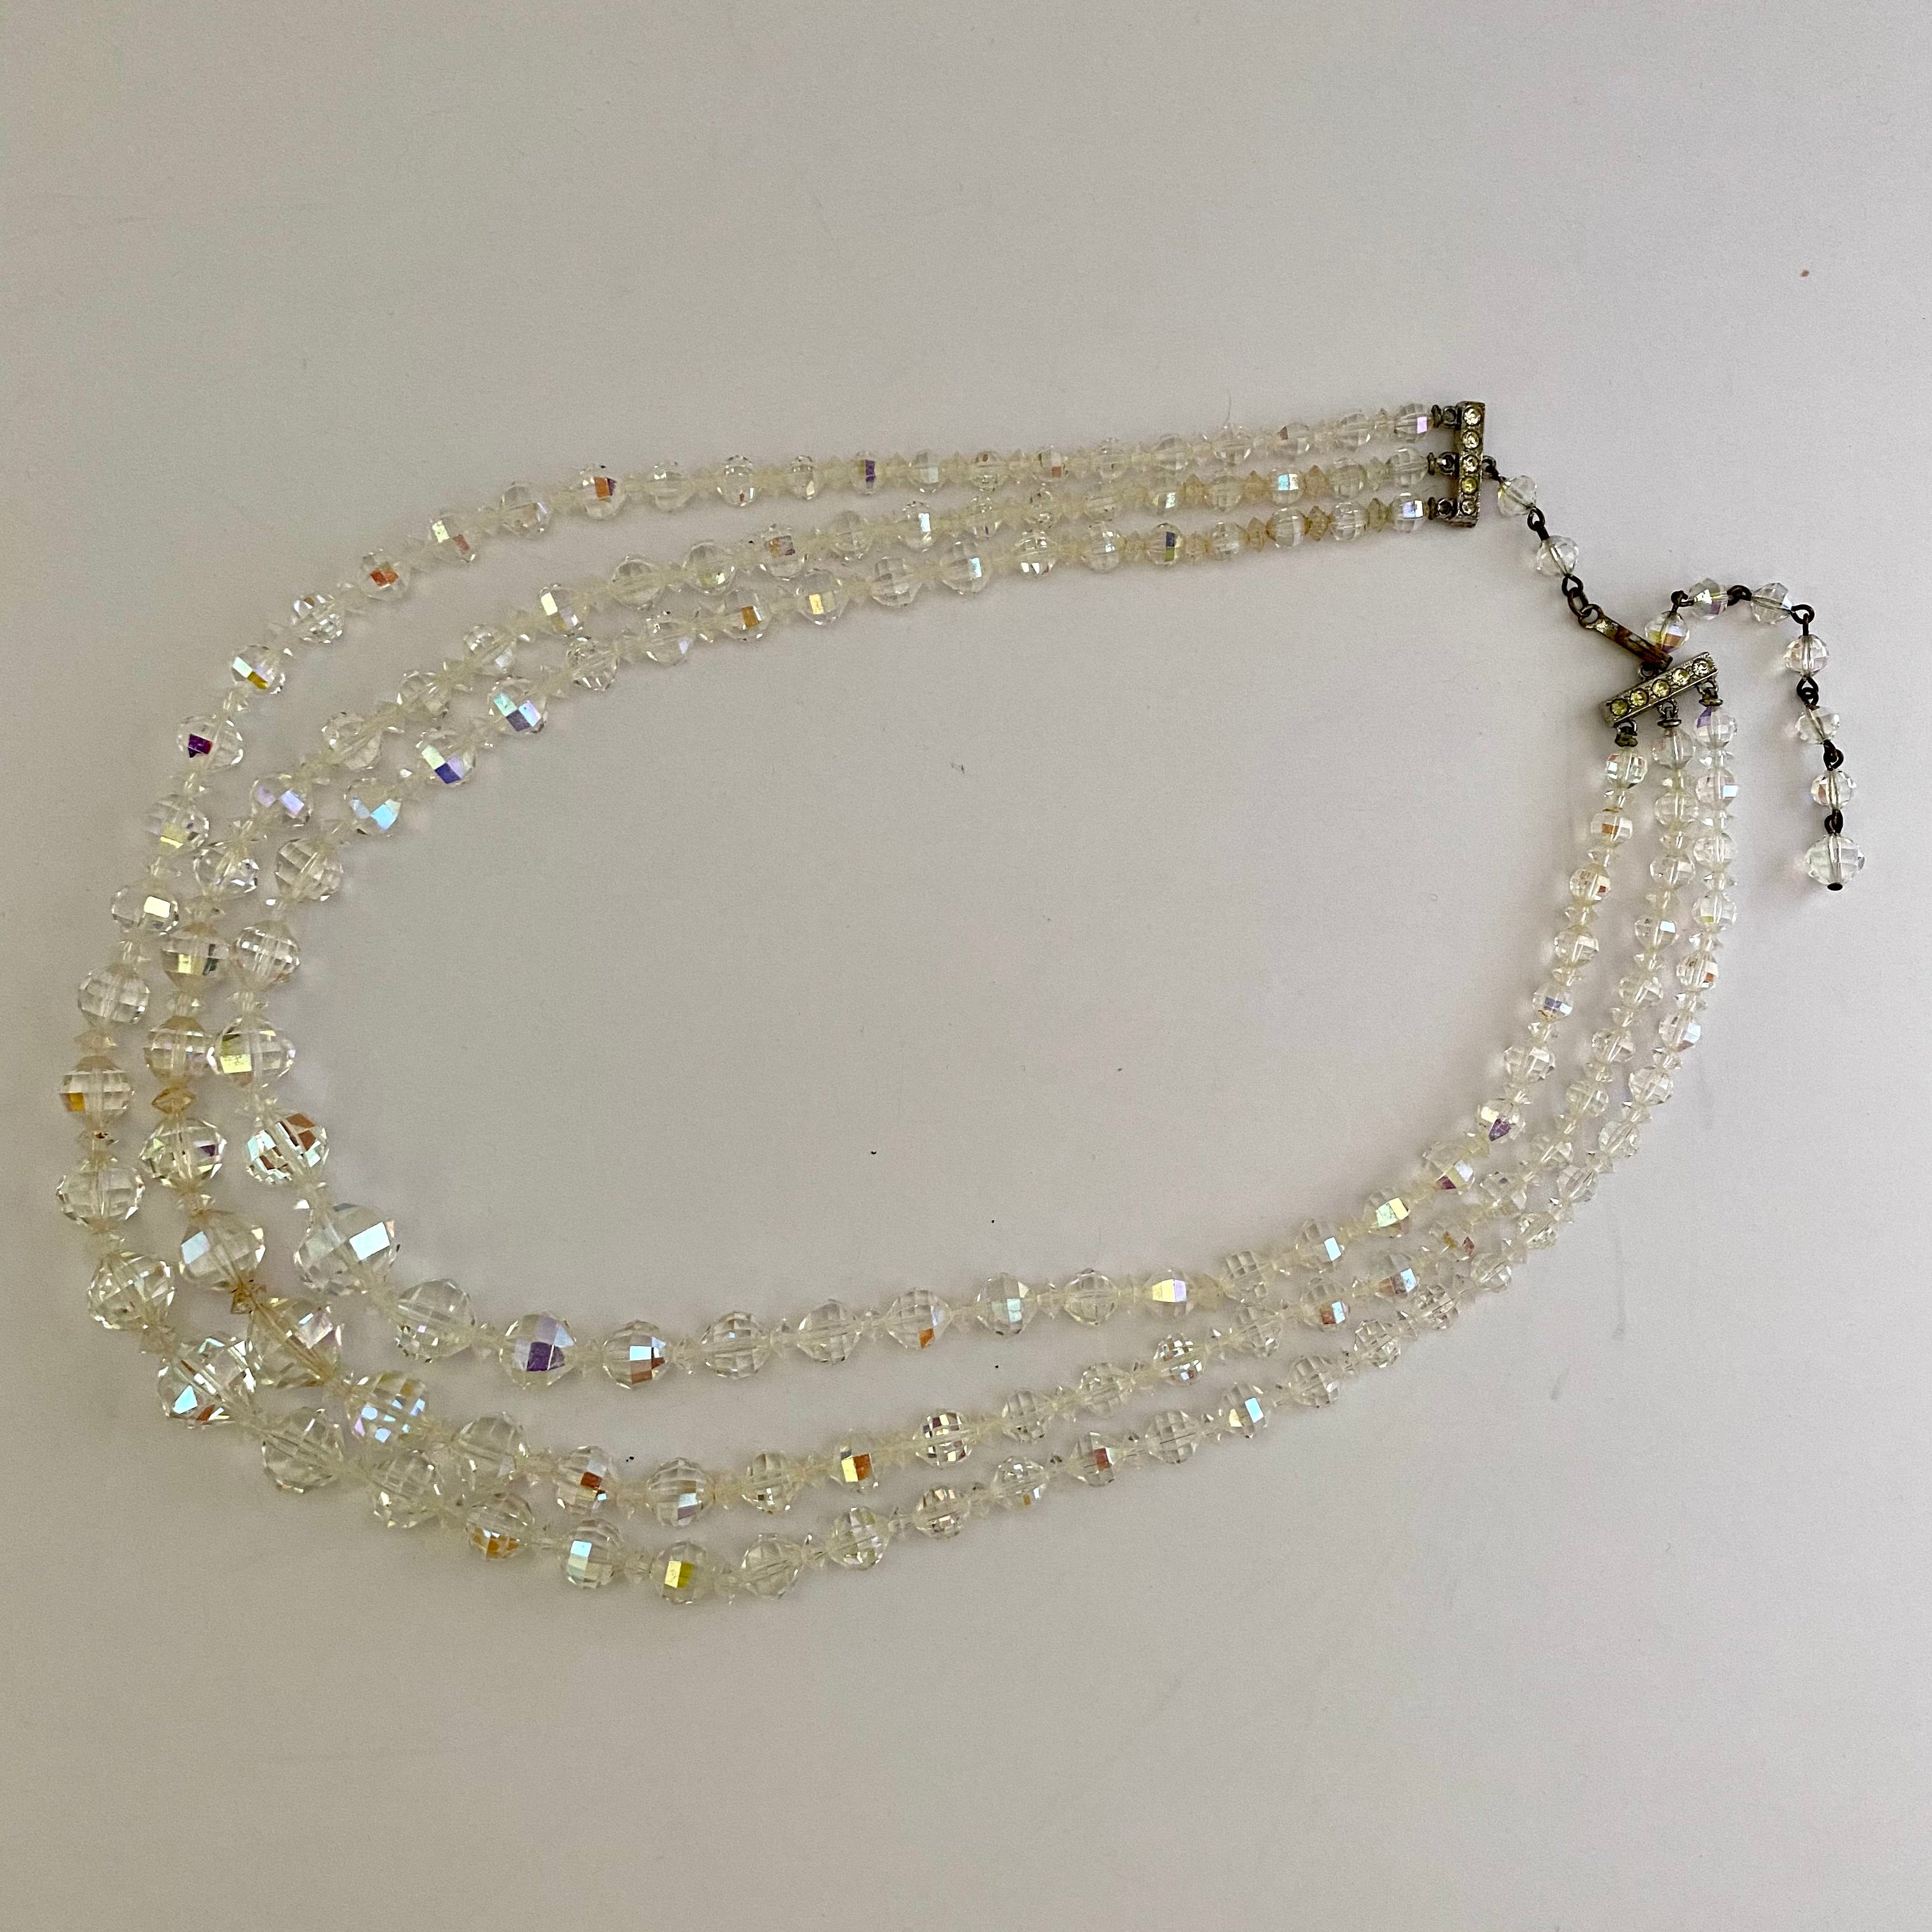 Jewelry | Vintage Crystal Beaded Necklace Graduated Faceted Beads On 16  Chain Estate | Poshmark